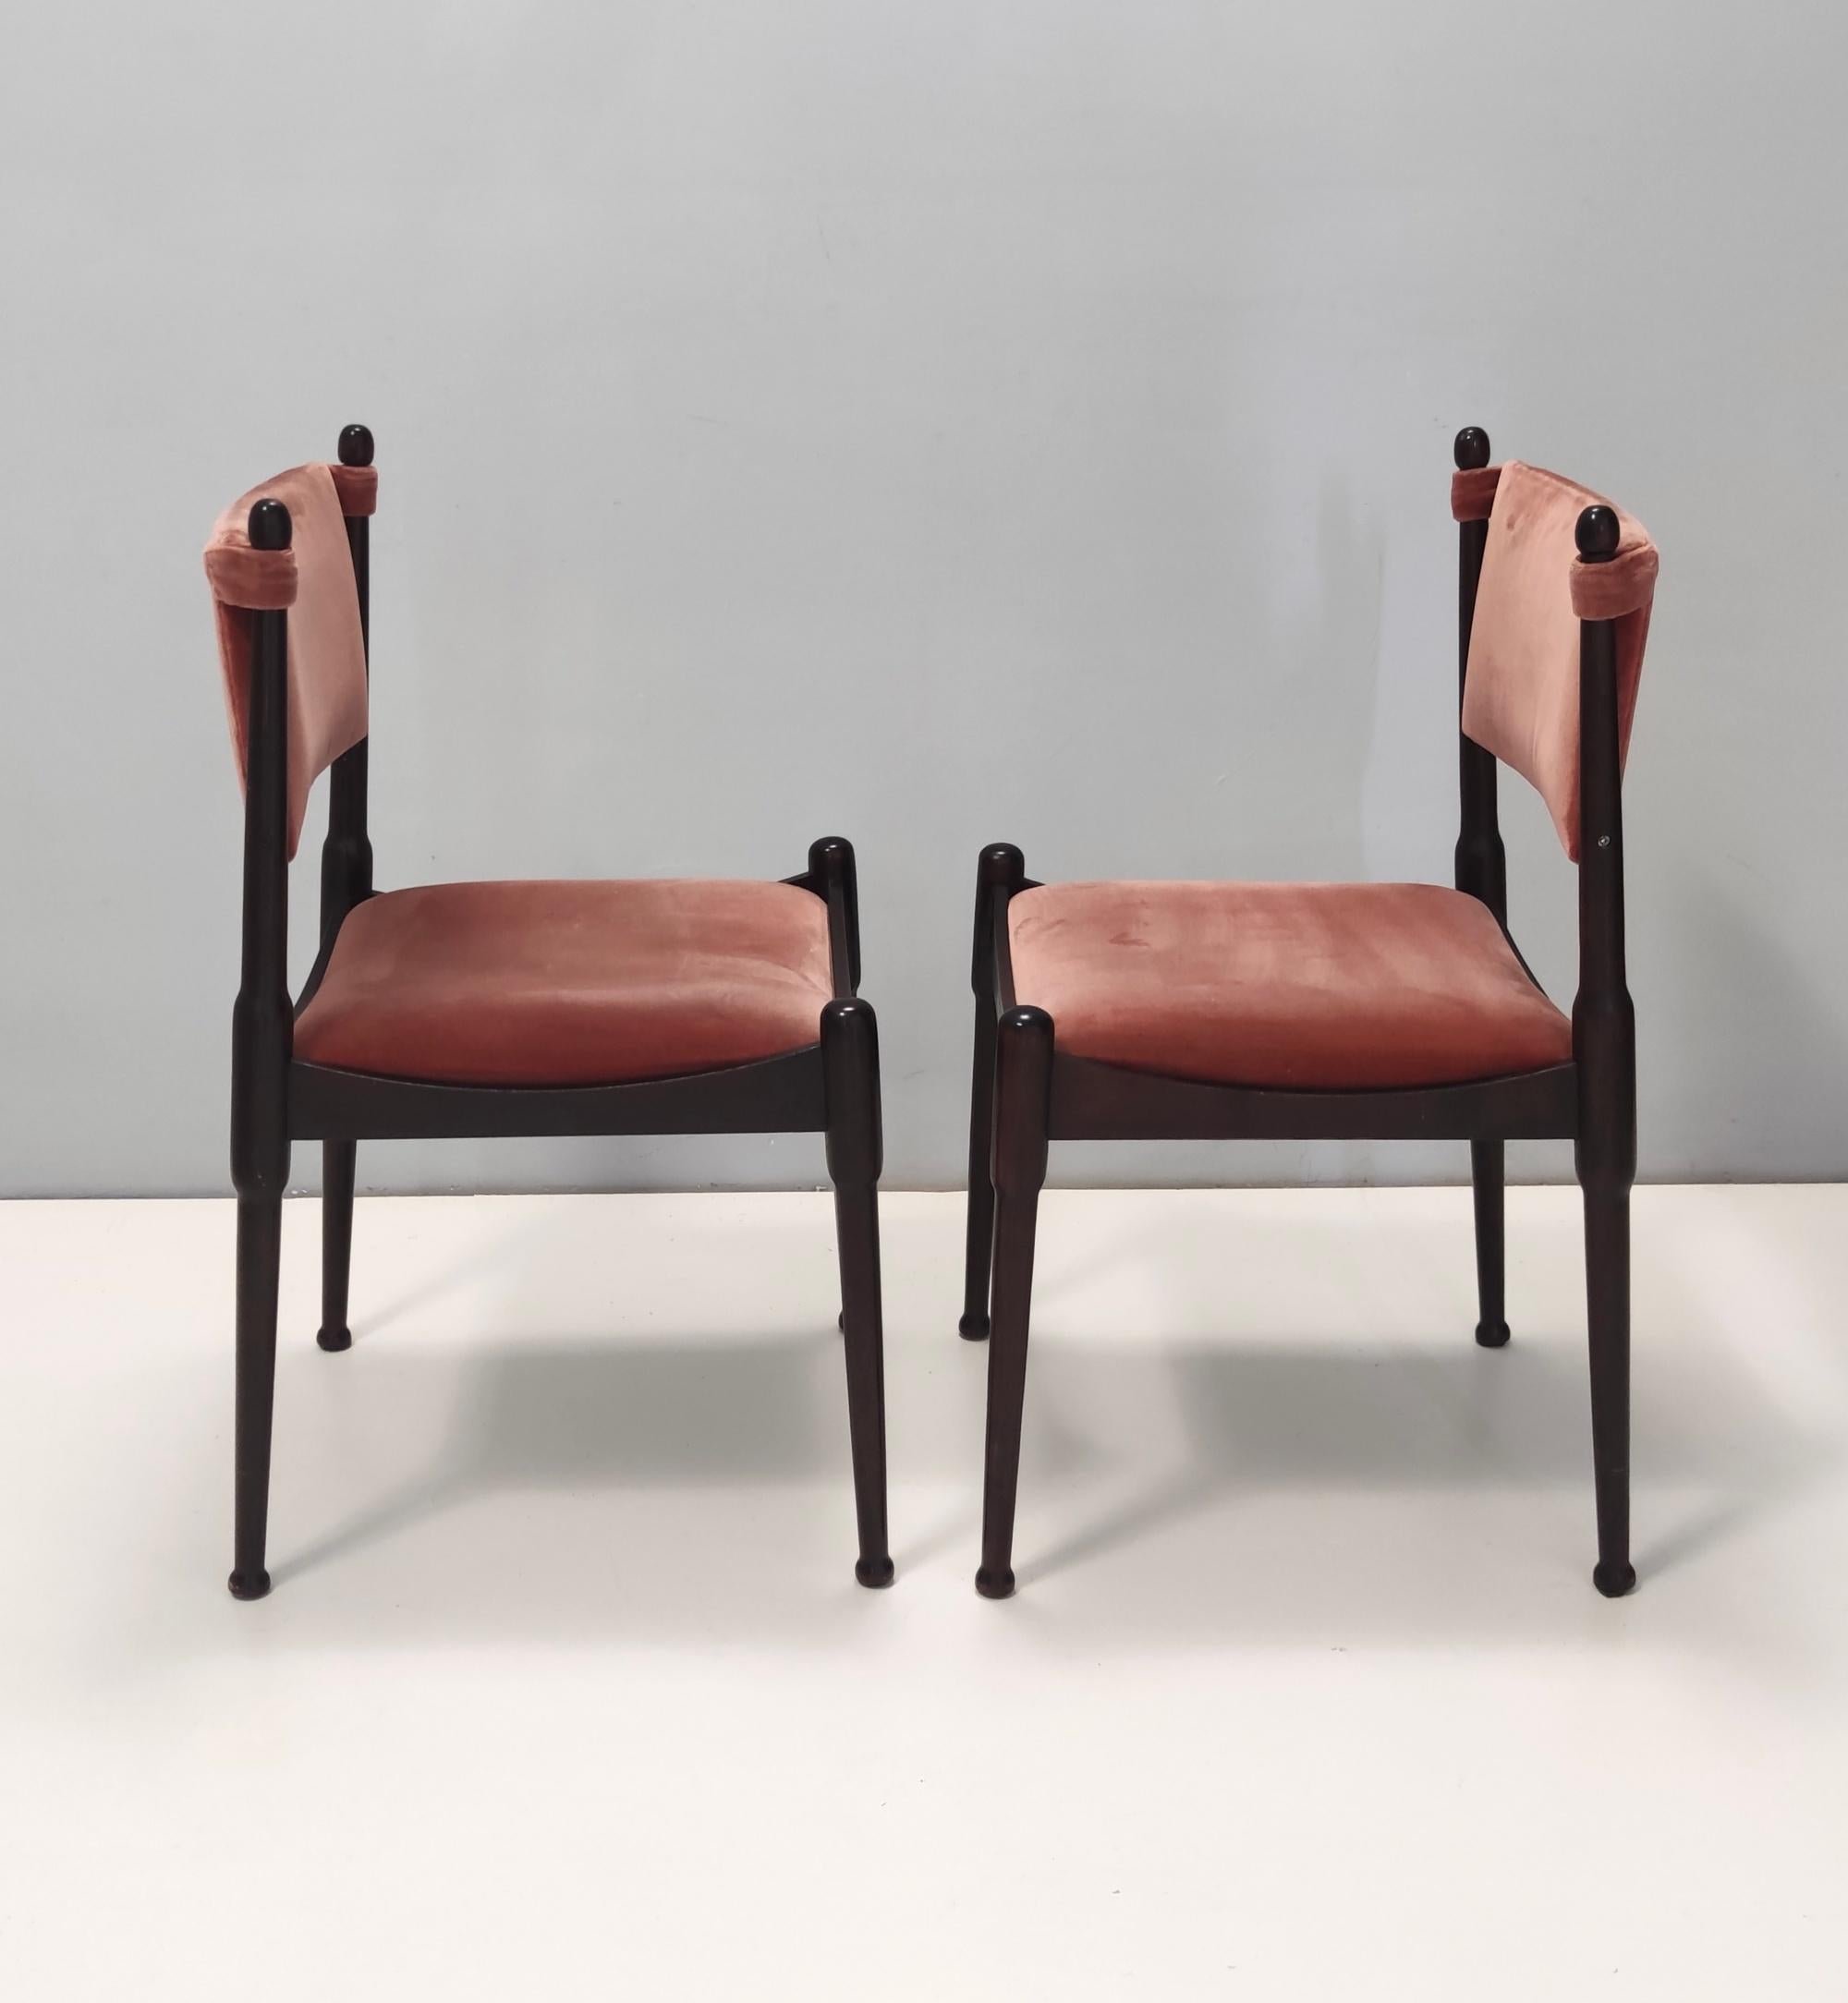 Pair of Salmon Pink Velvet Side Chairs Ascribable to Silvio Coppola, Italy 1